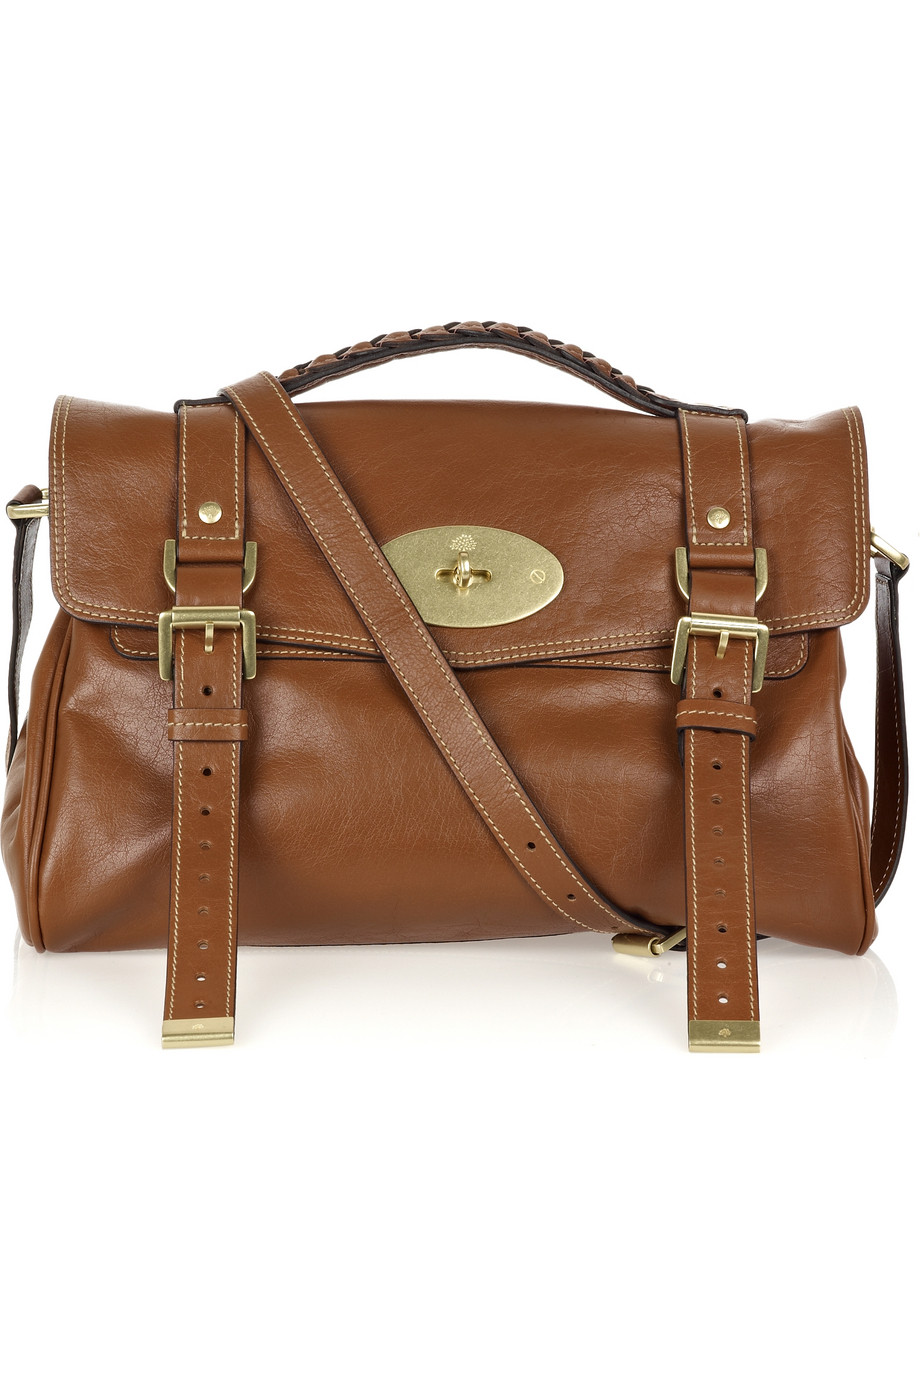 Mulberry Alexa Leather Bag in Brown | Lyst